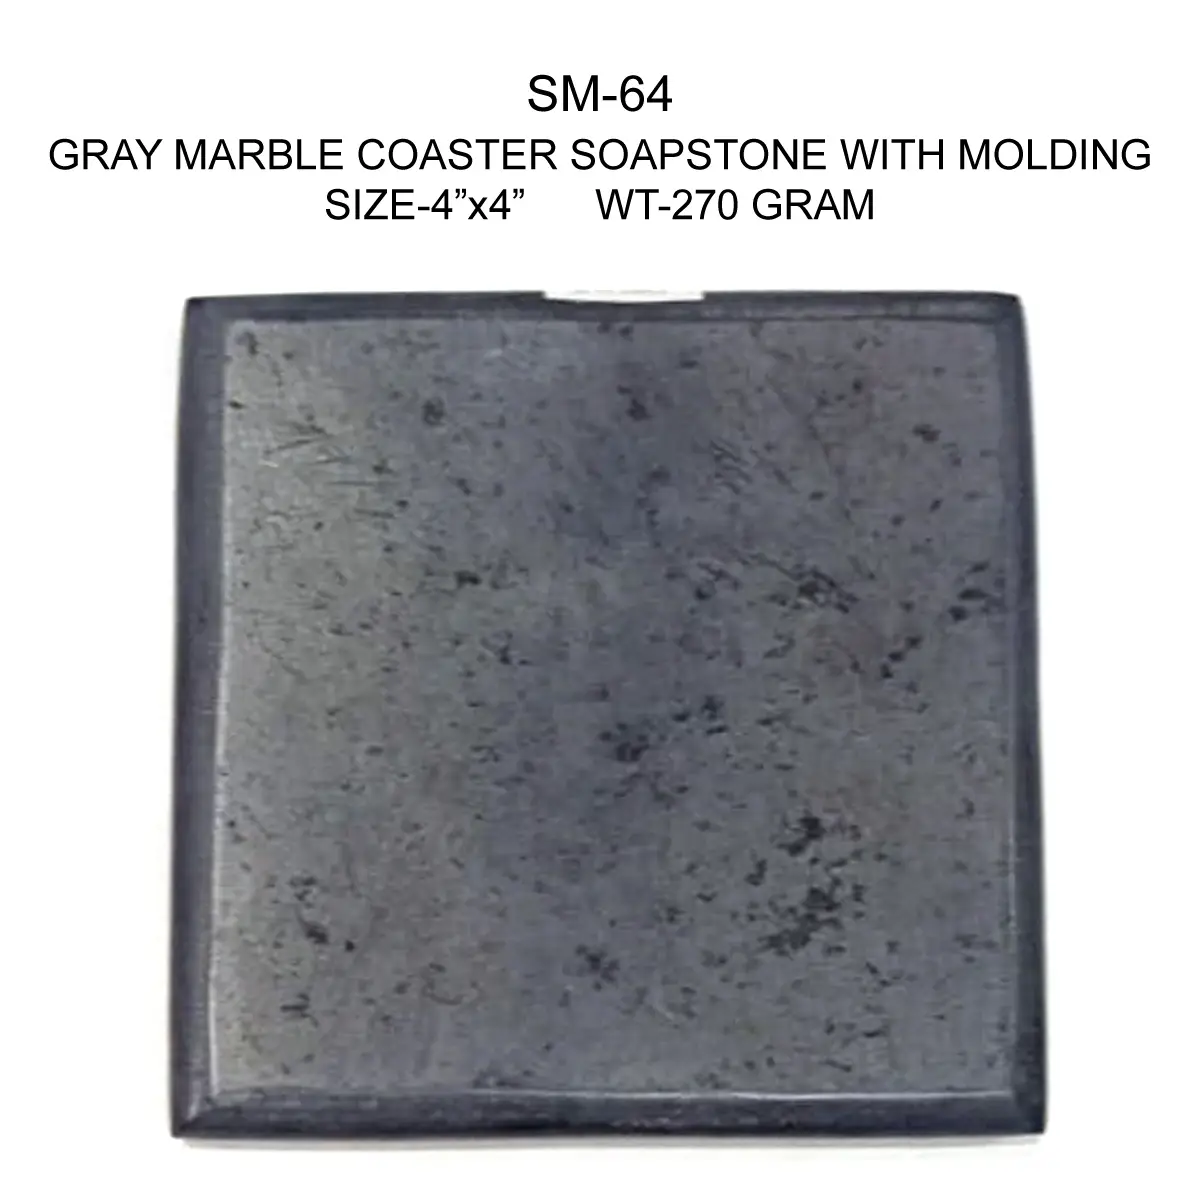 GRAY MARBLE COASTER SOAPSTONE WITH
MOLDING